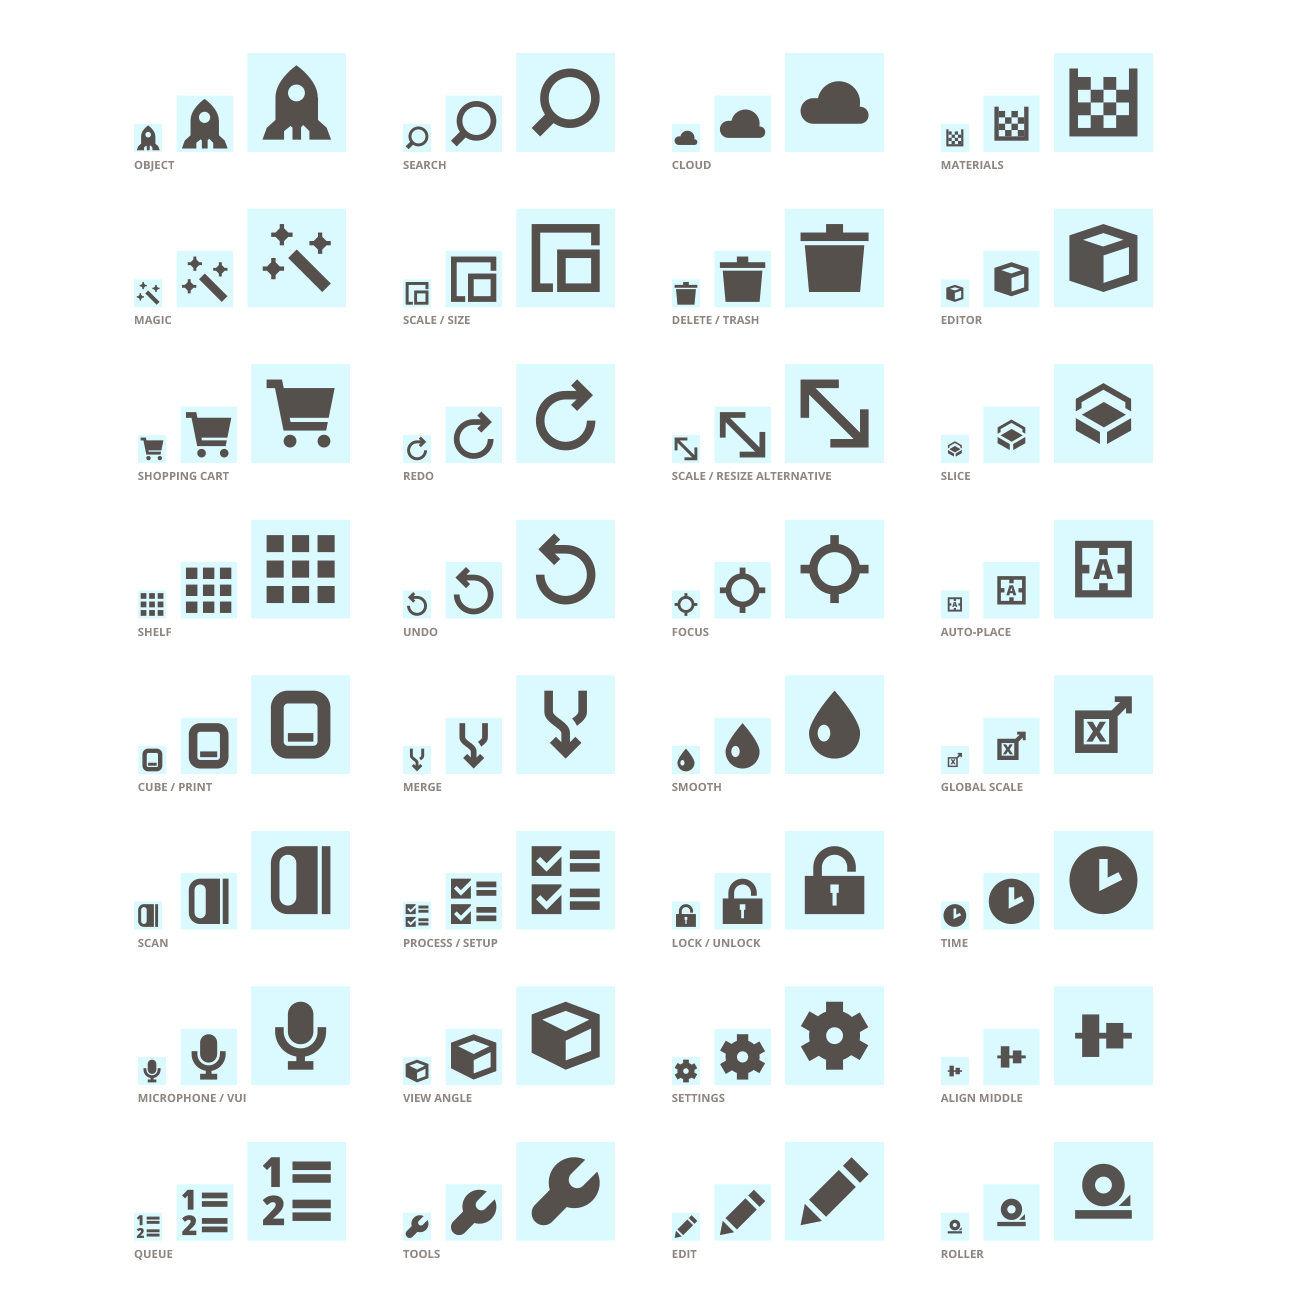 icons that could be used across interfaces